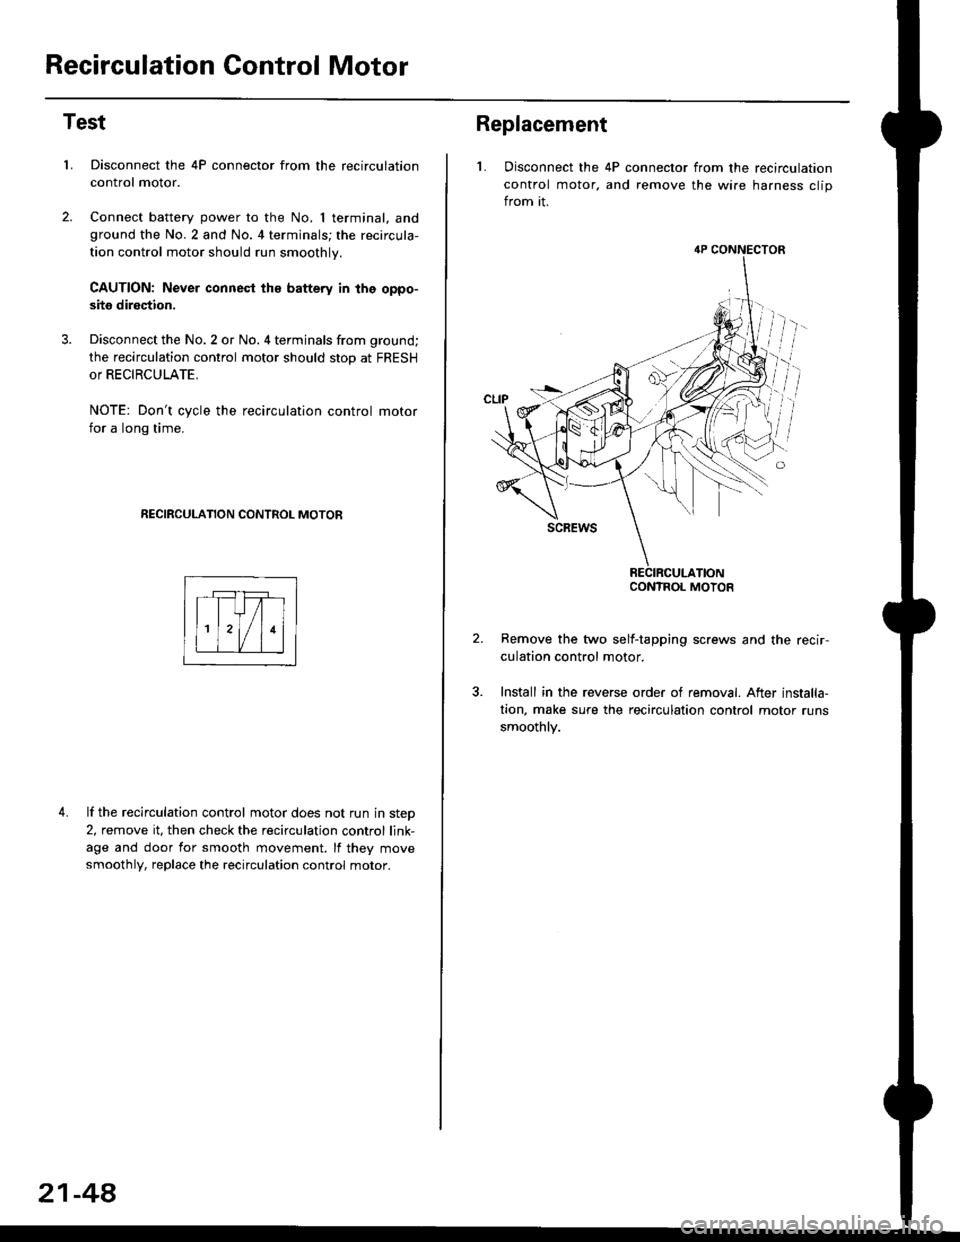 HONDA CIVIC 1996 6.G Workshop Manual Recirculation Control Motor
Test
LDisconnect the 4P connector from the recirculation
control motor.
Connect battery power to the No. I terminal, andground the No.2 and No. 4 terminals; the recircula-
